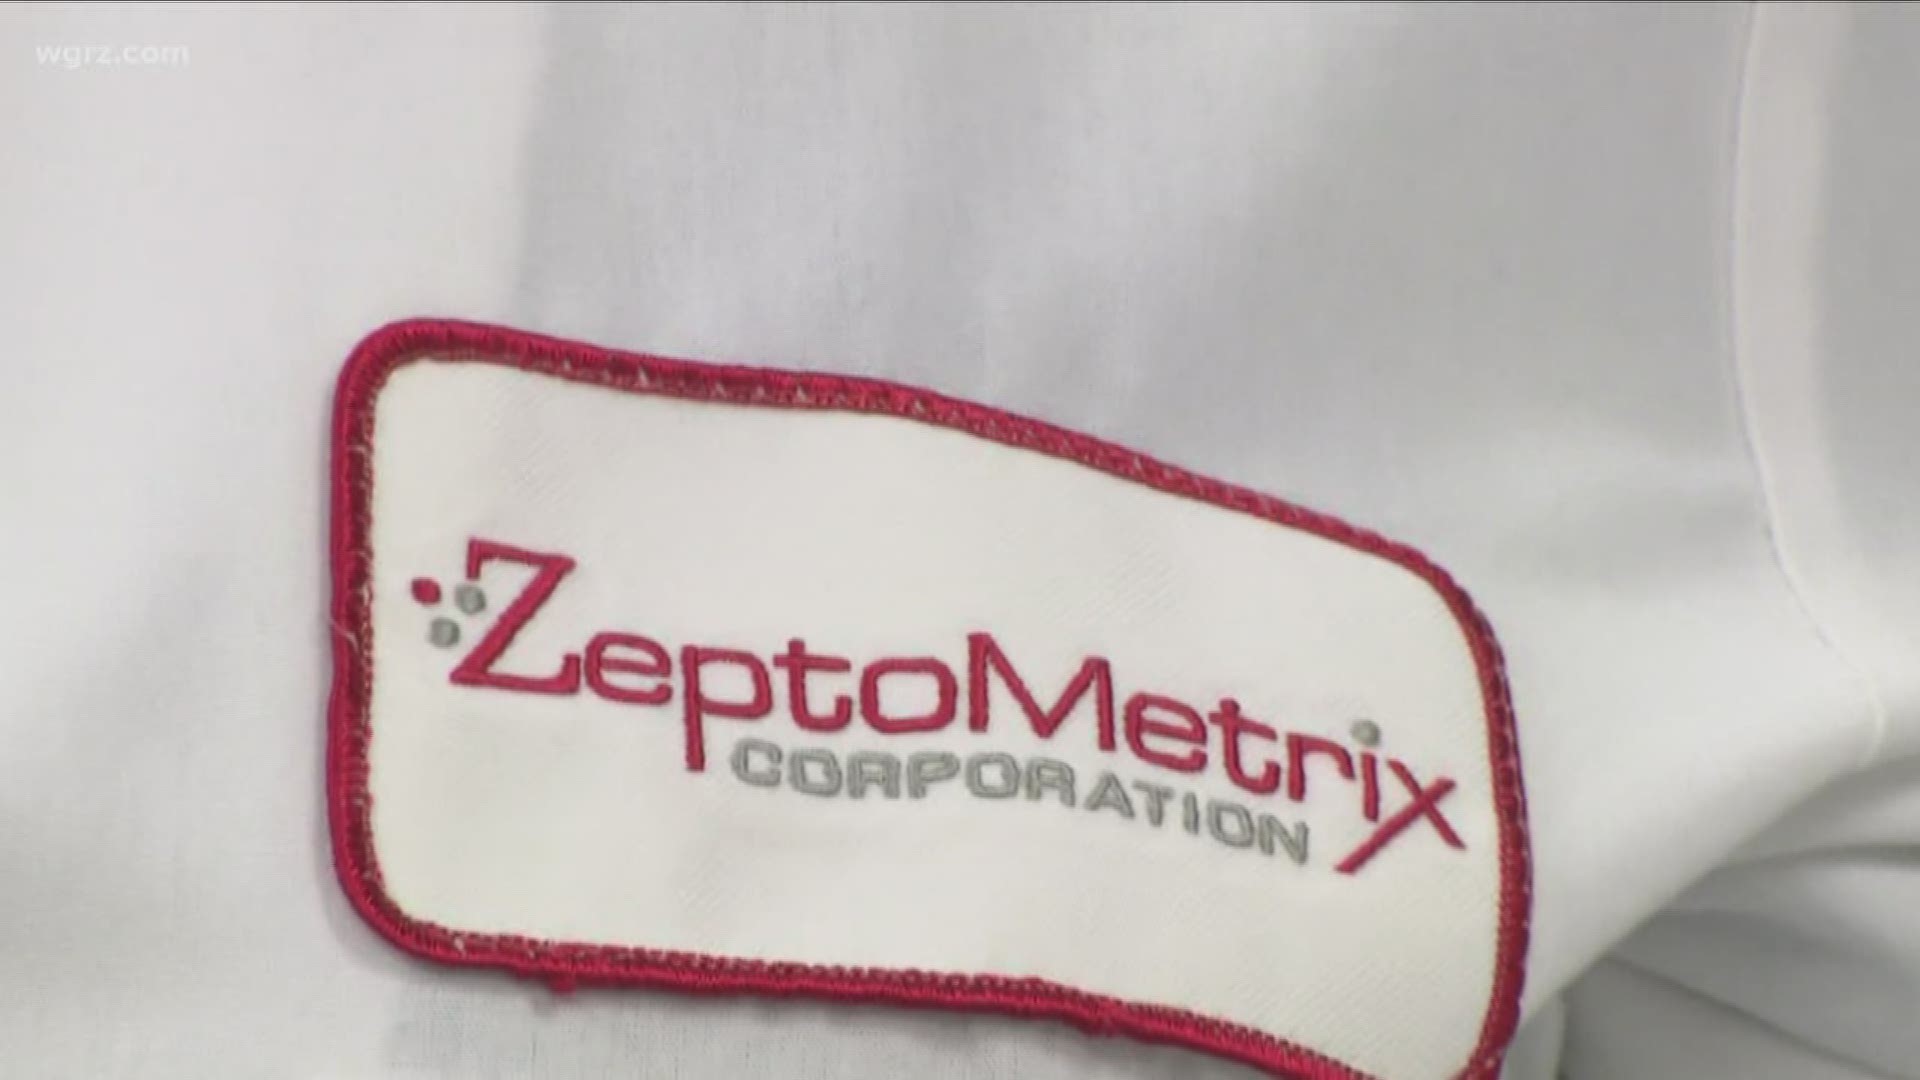 Zeptometrix is working with the virus as one step in the process of finding treatments, using heat and chemicals to deactivate the virus and send it to public labs.